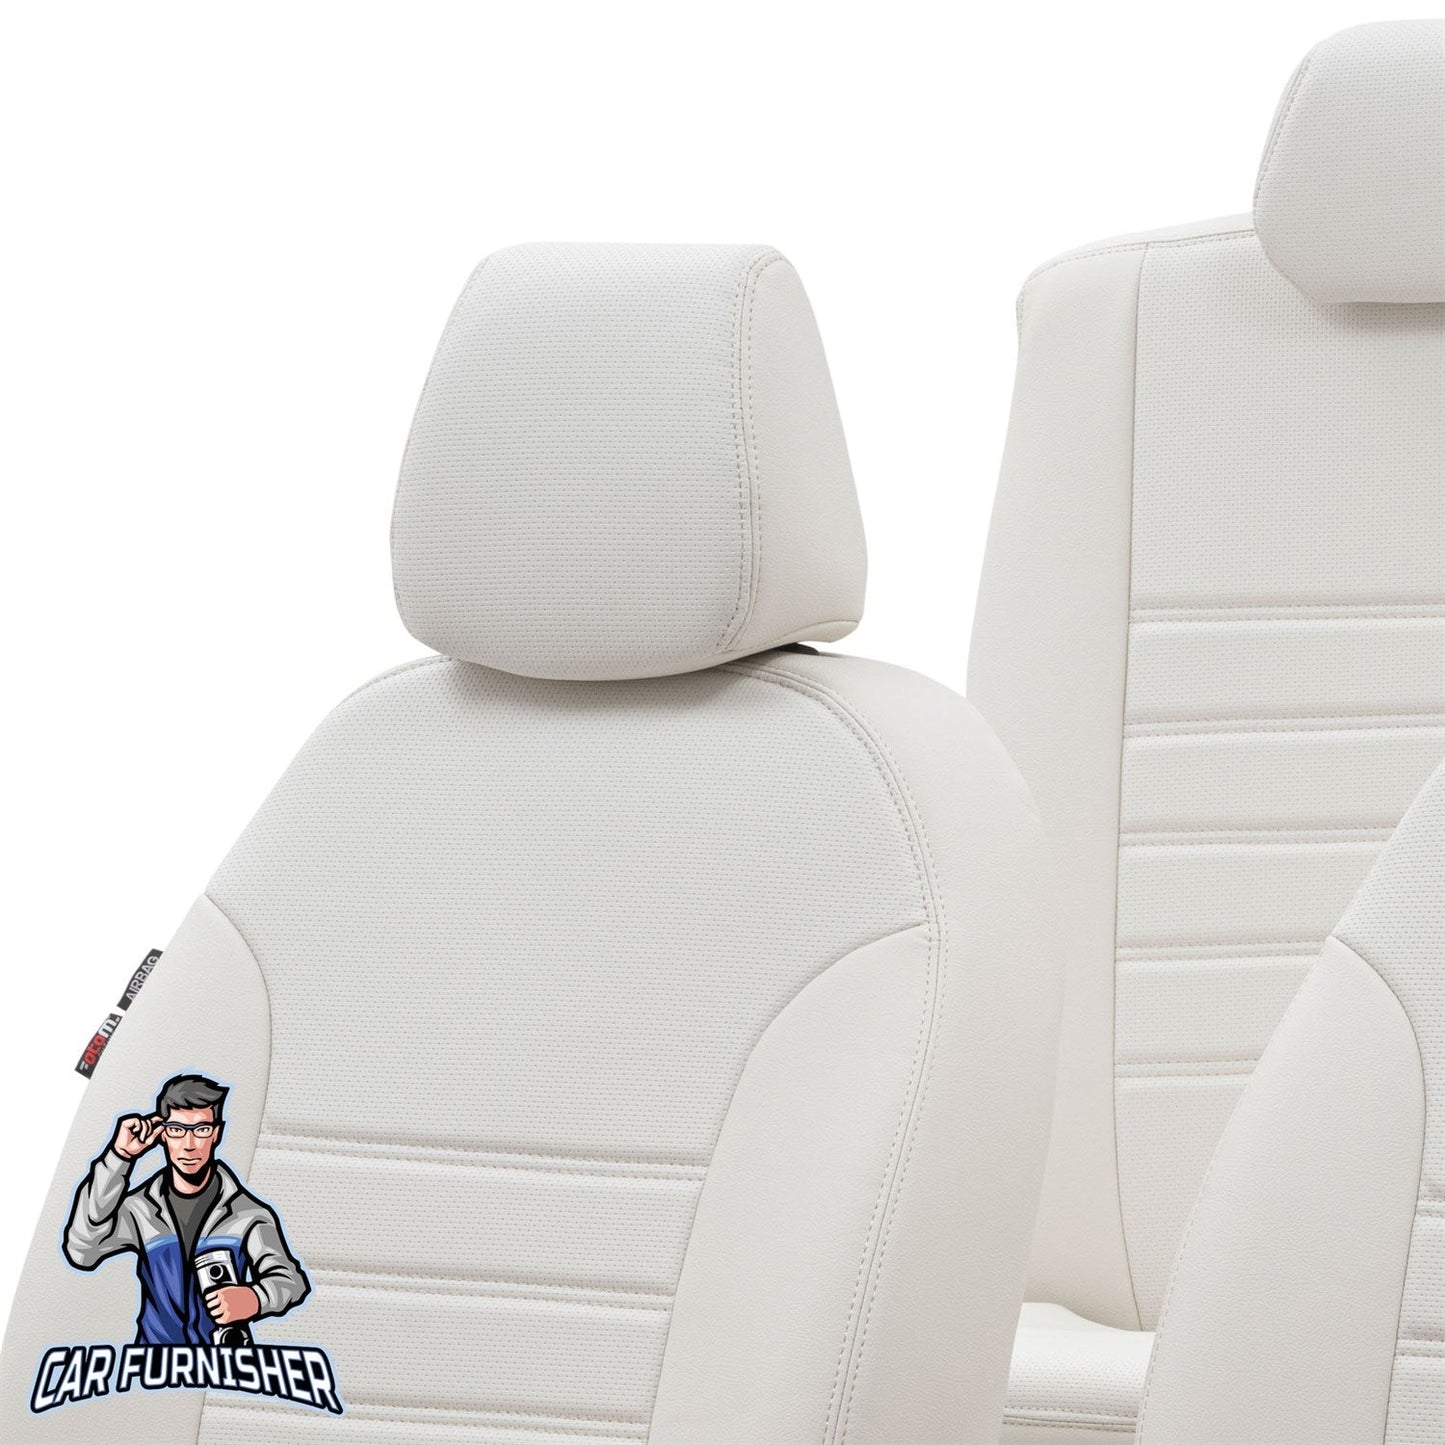 Fiat Scudo Seat Covers New York Leather Design Ivory Leather